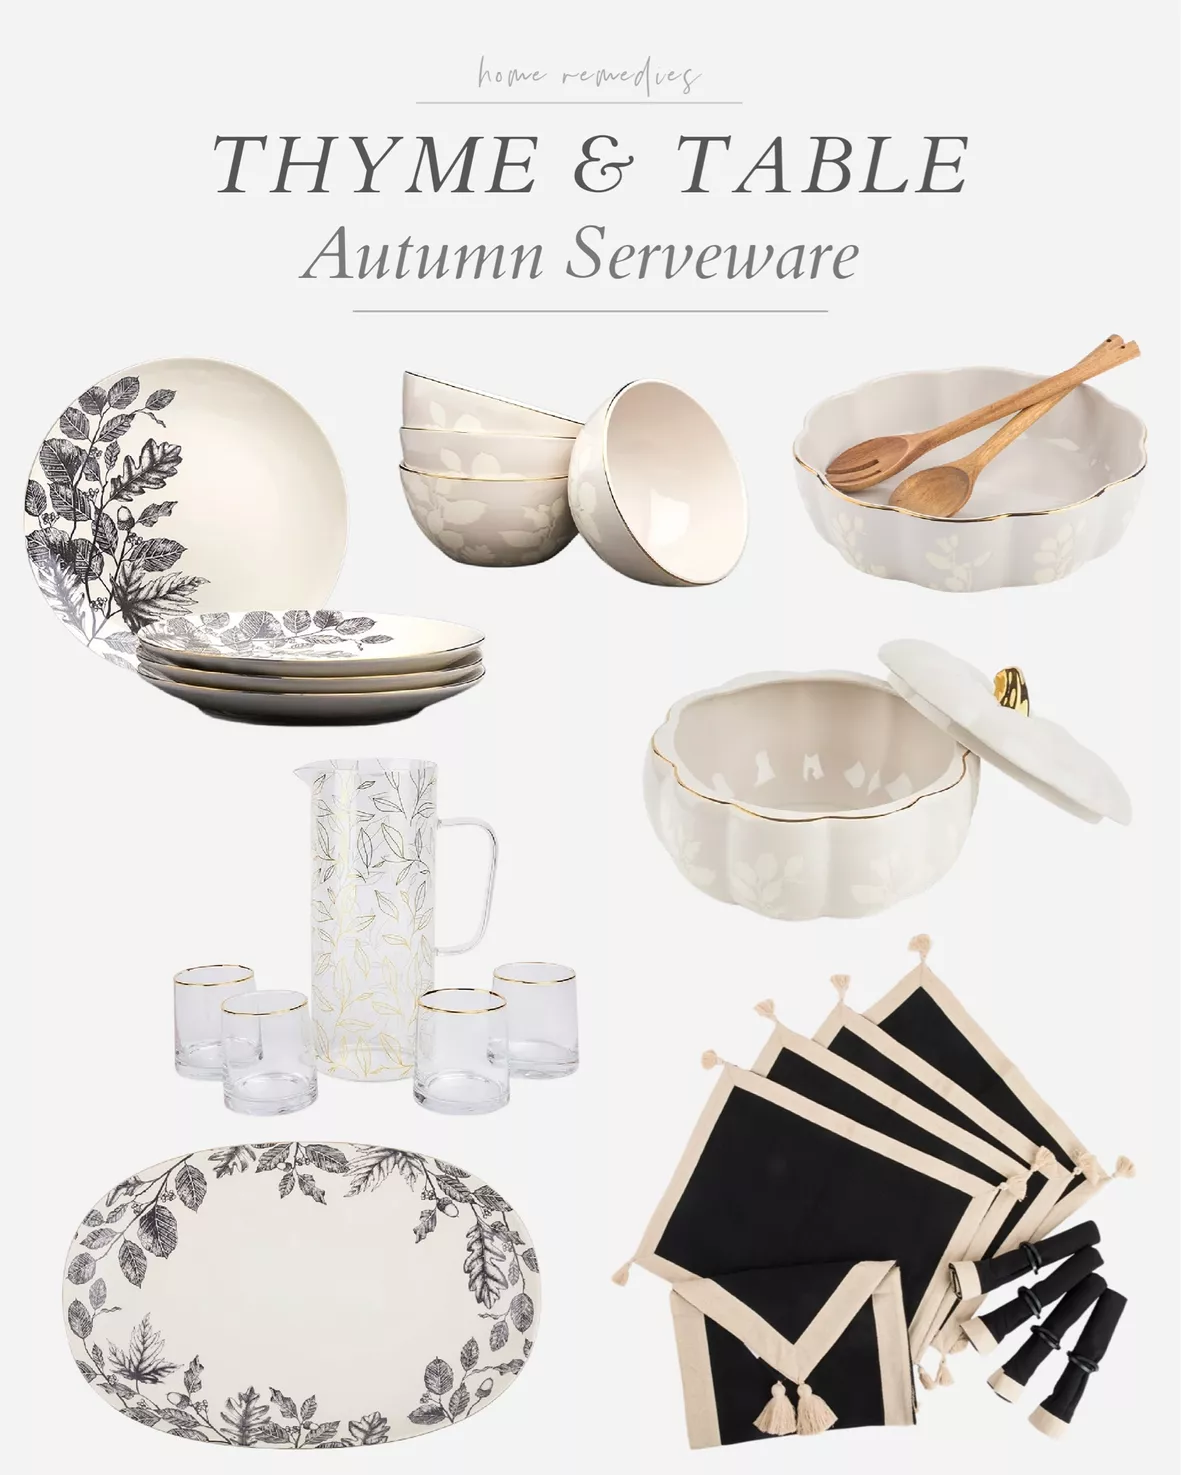 THYME & TABLE